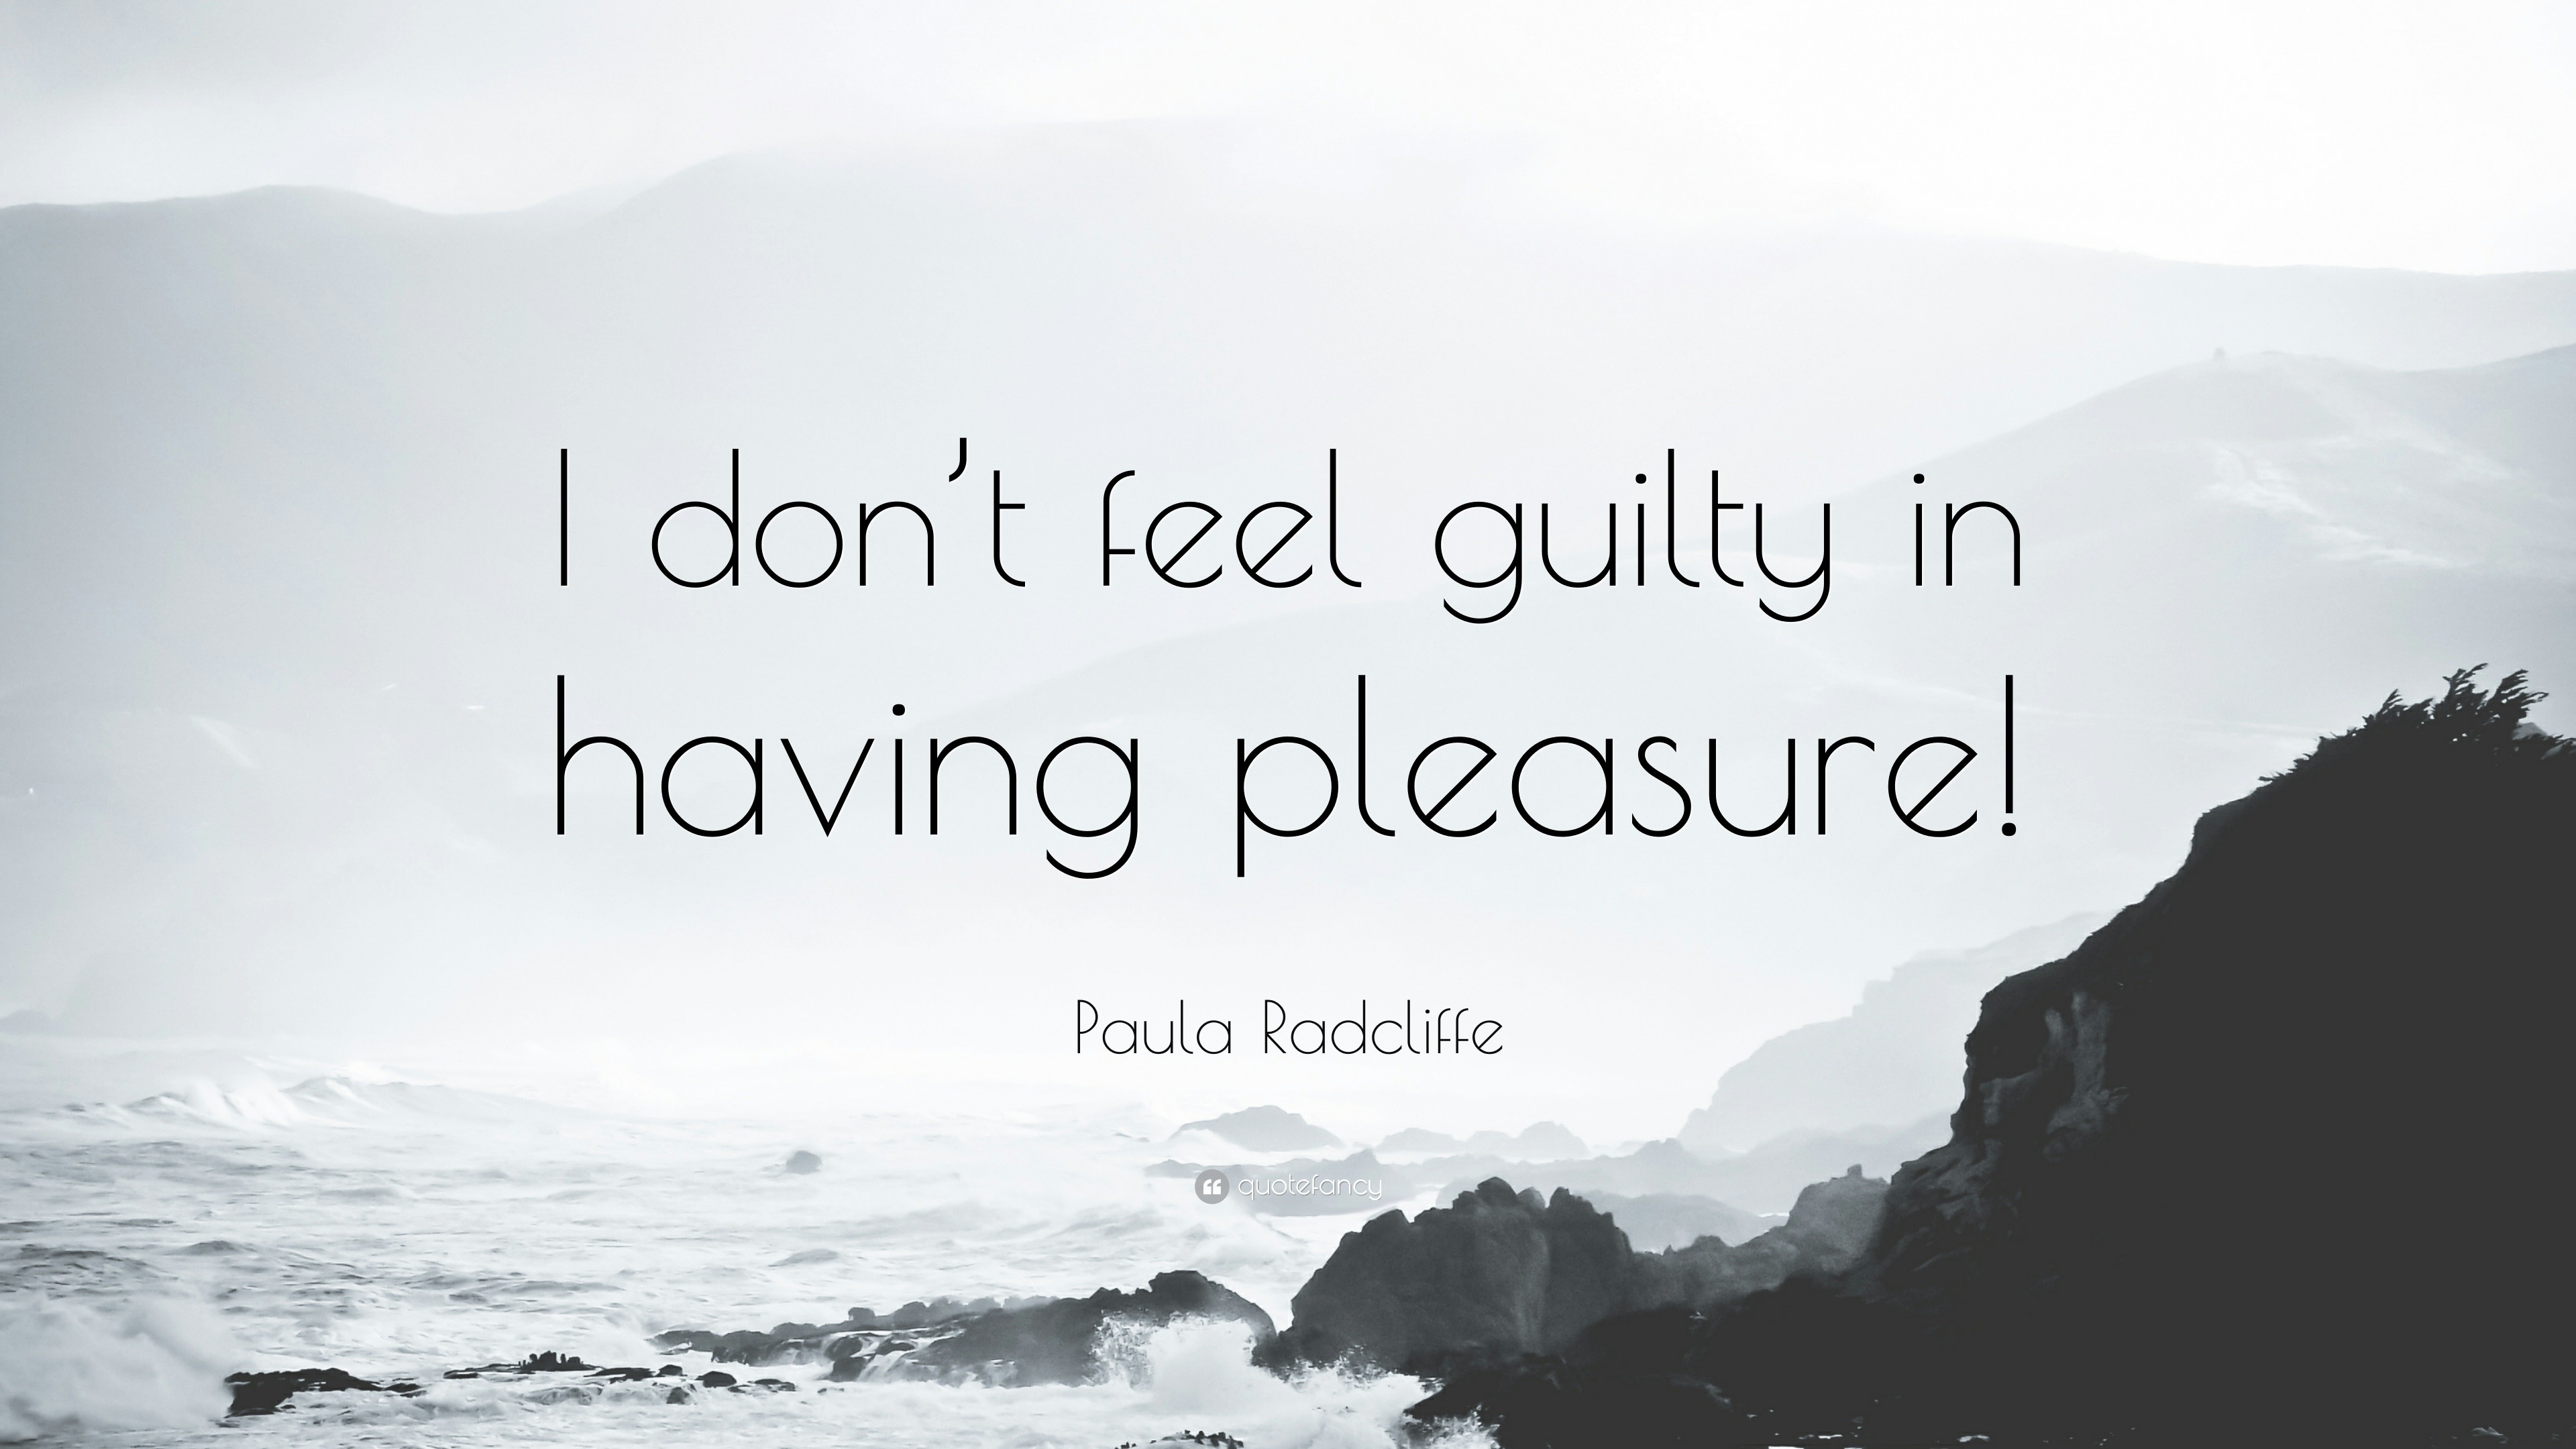 Paula Radcliffe Quote: “I don't feel guilty in having pleasure!”